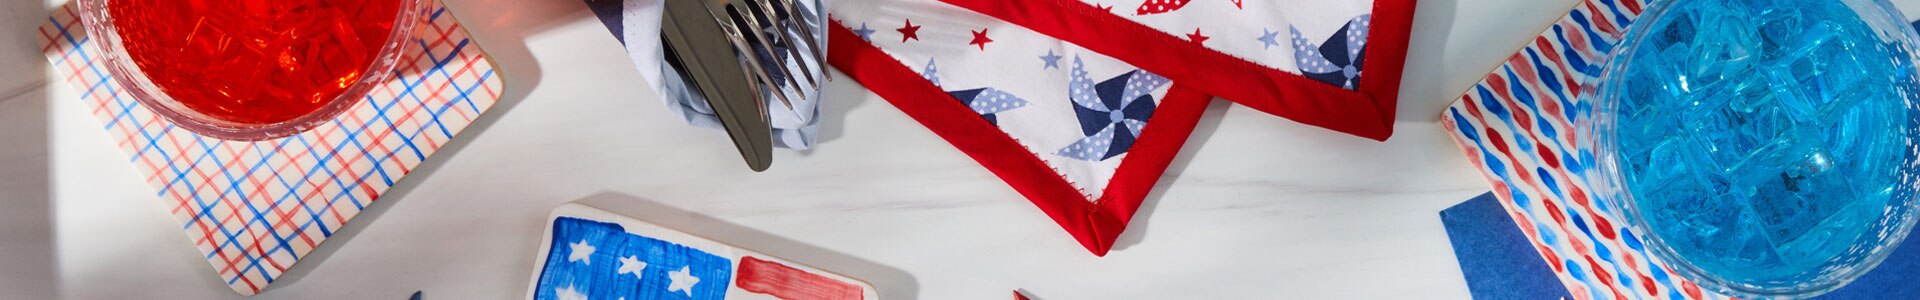 Patriotic party entertaining crafts of table clothes and patriotic coasters